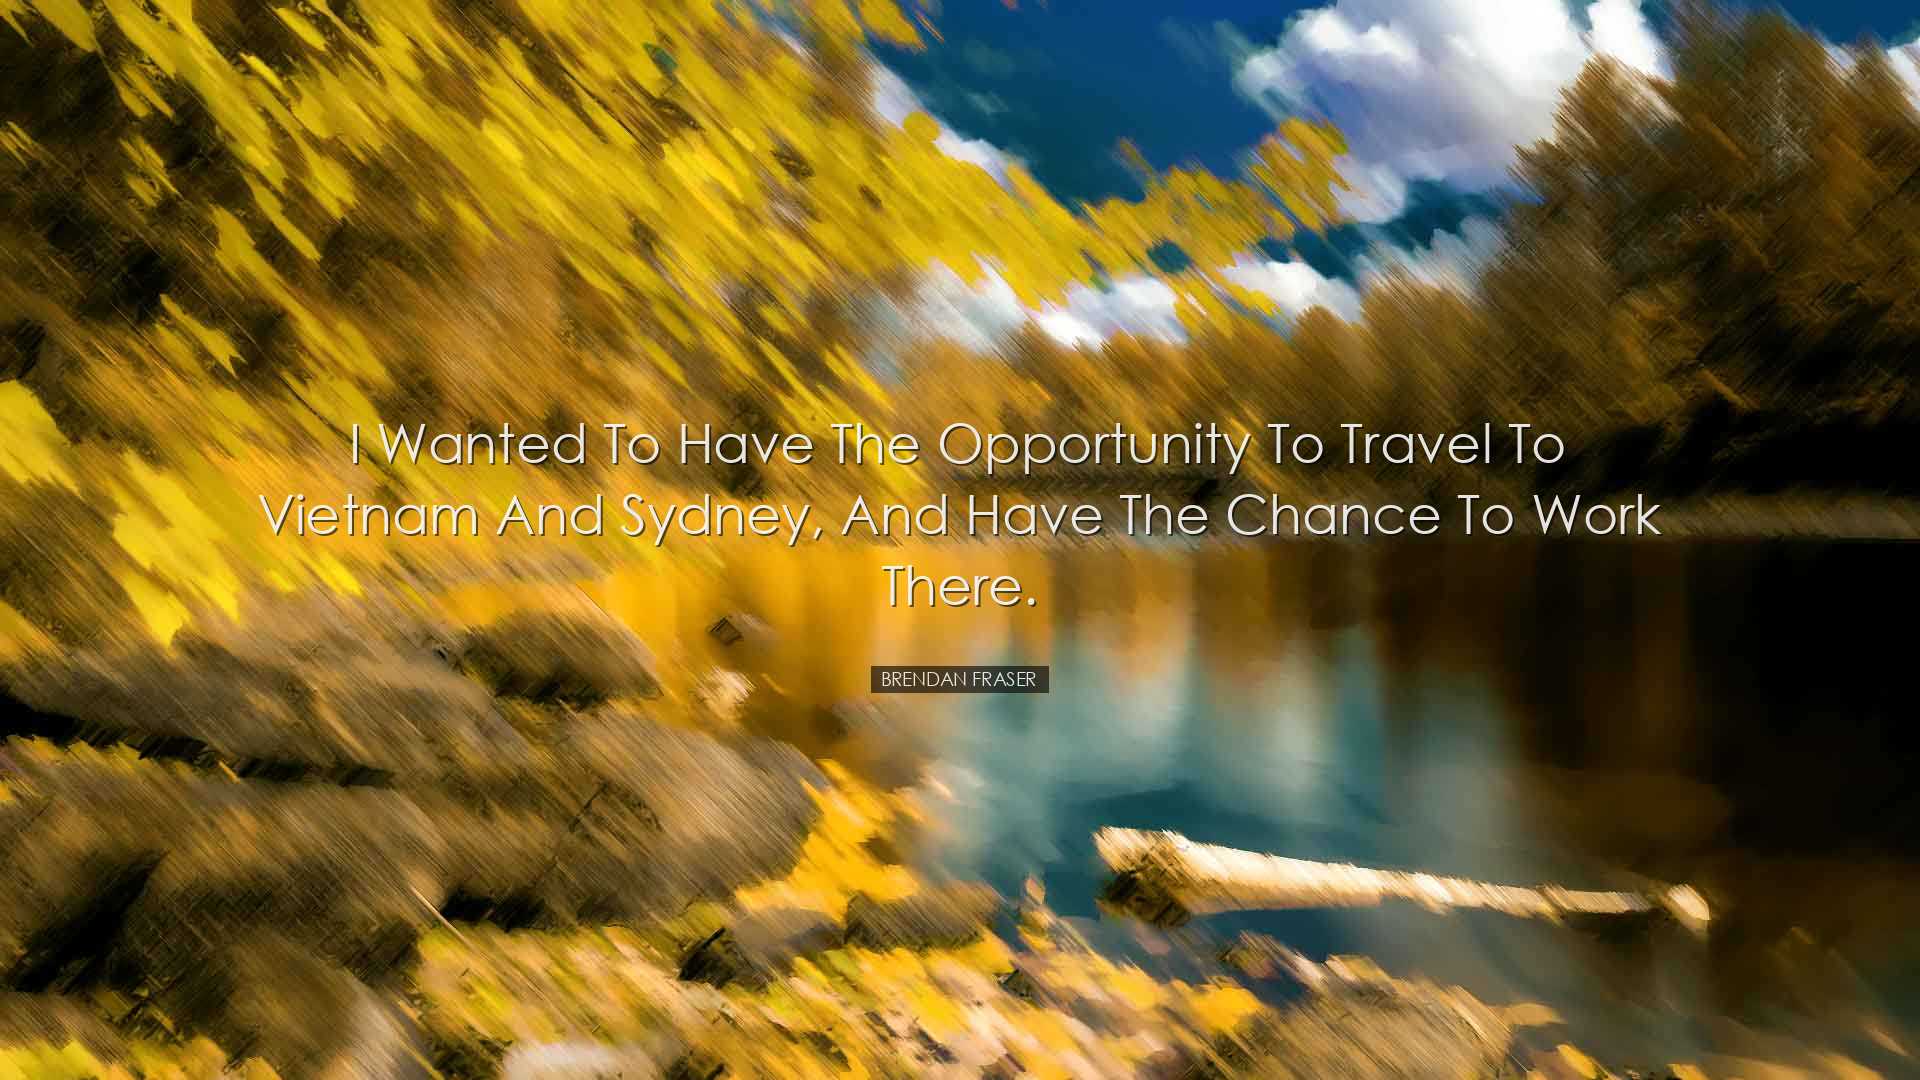 I wanted to have the opportunity to travel to Vietnam and Sydney,